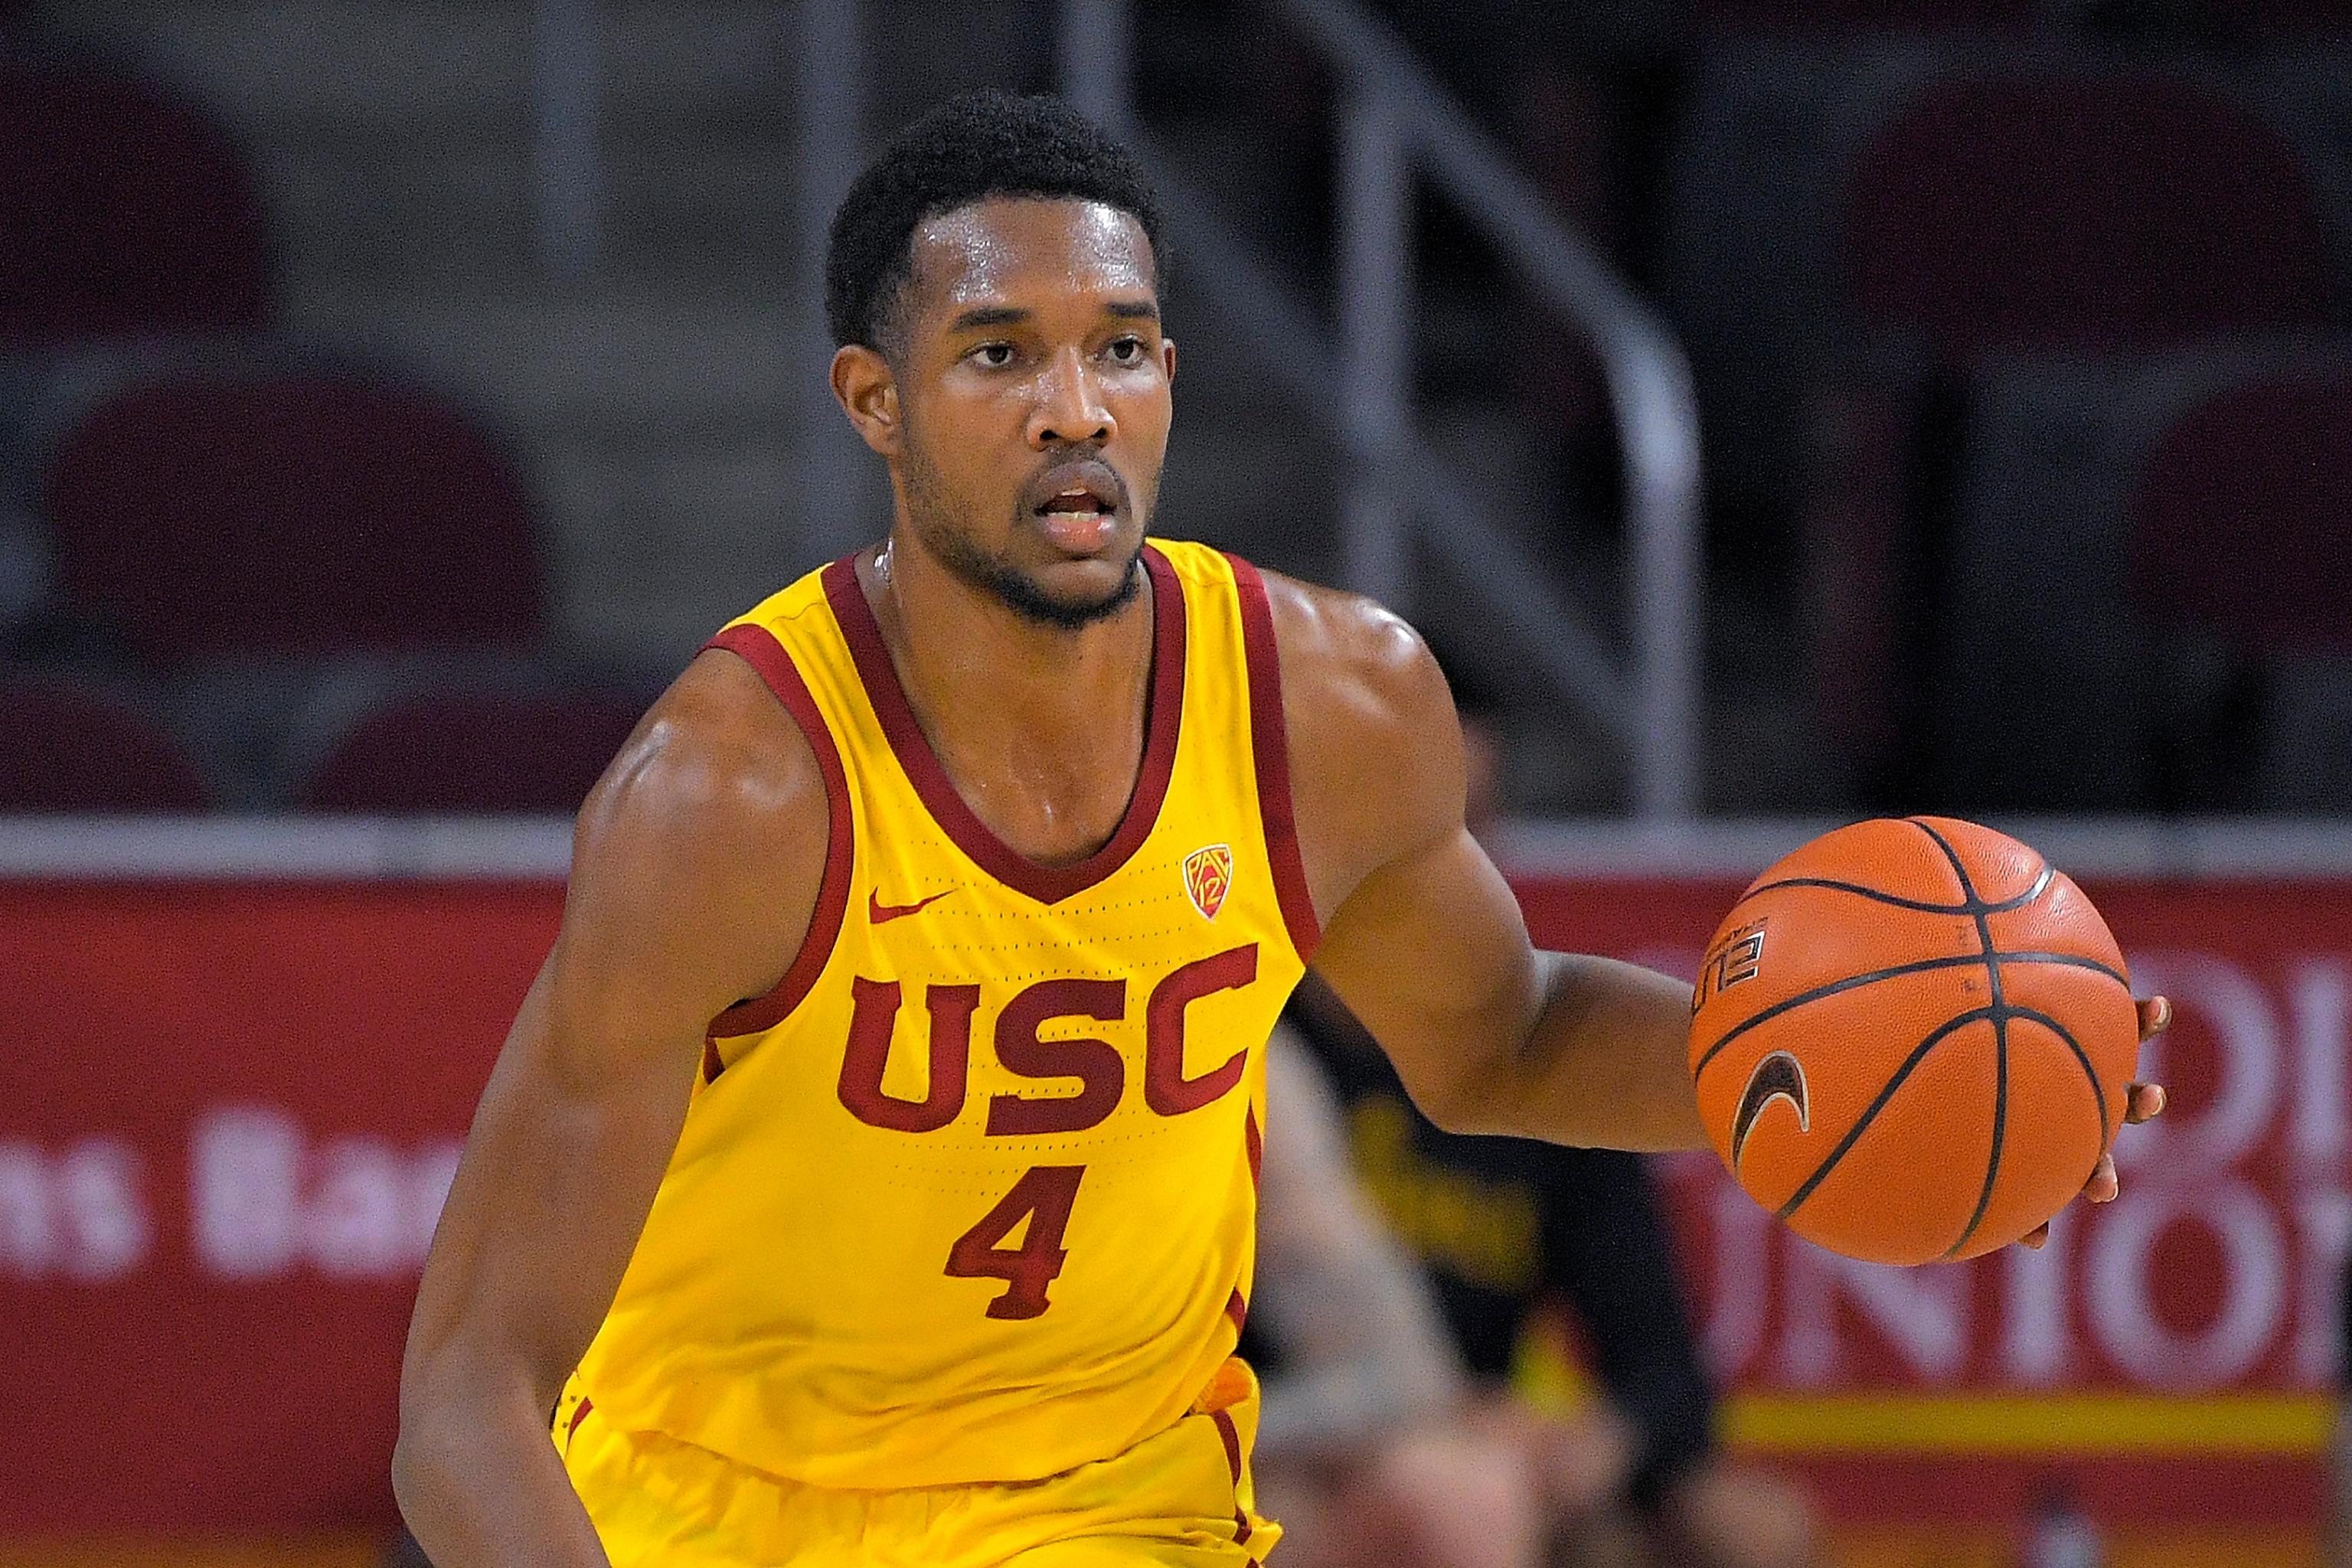 USC&#39;s Evan Mobley Declares for 2021 NBA Draft; Projected Top 10 Pick | Bleacher Report | Latest News, Videos and Highlights